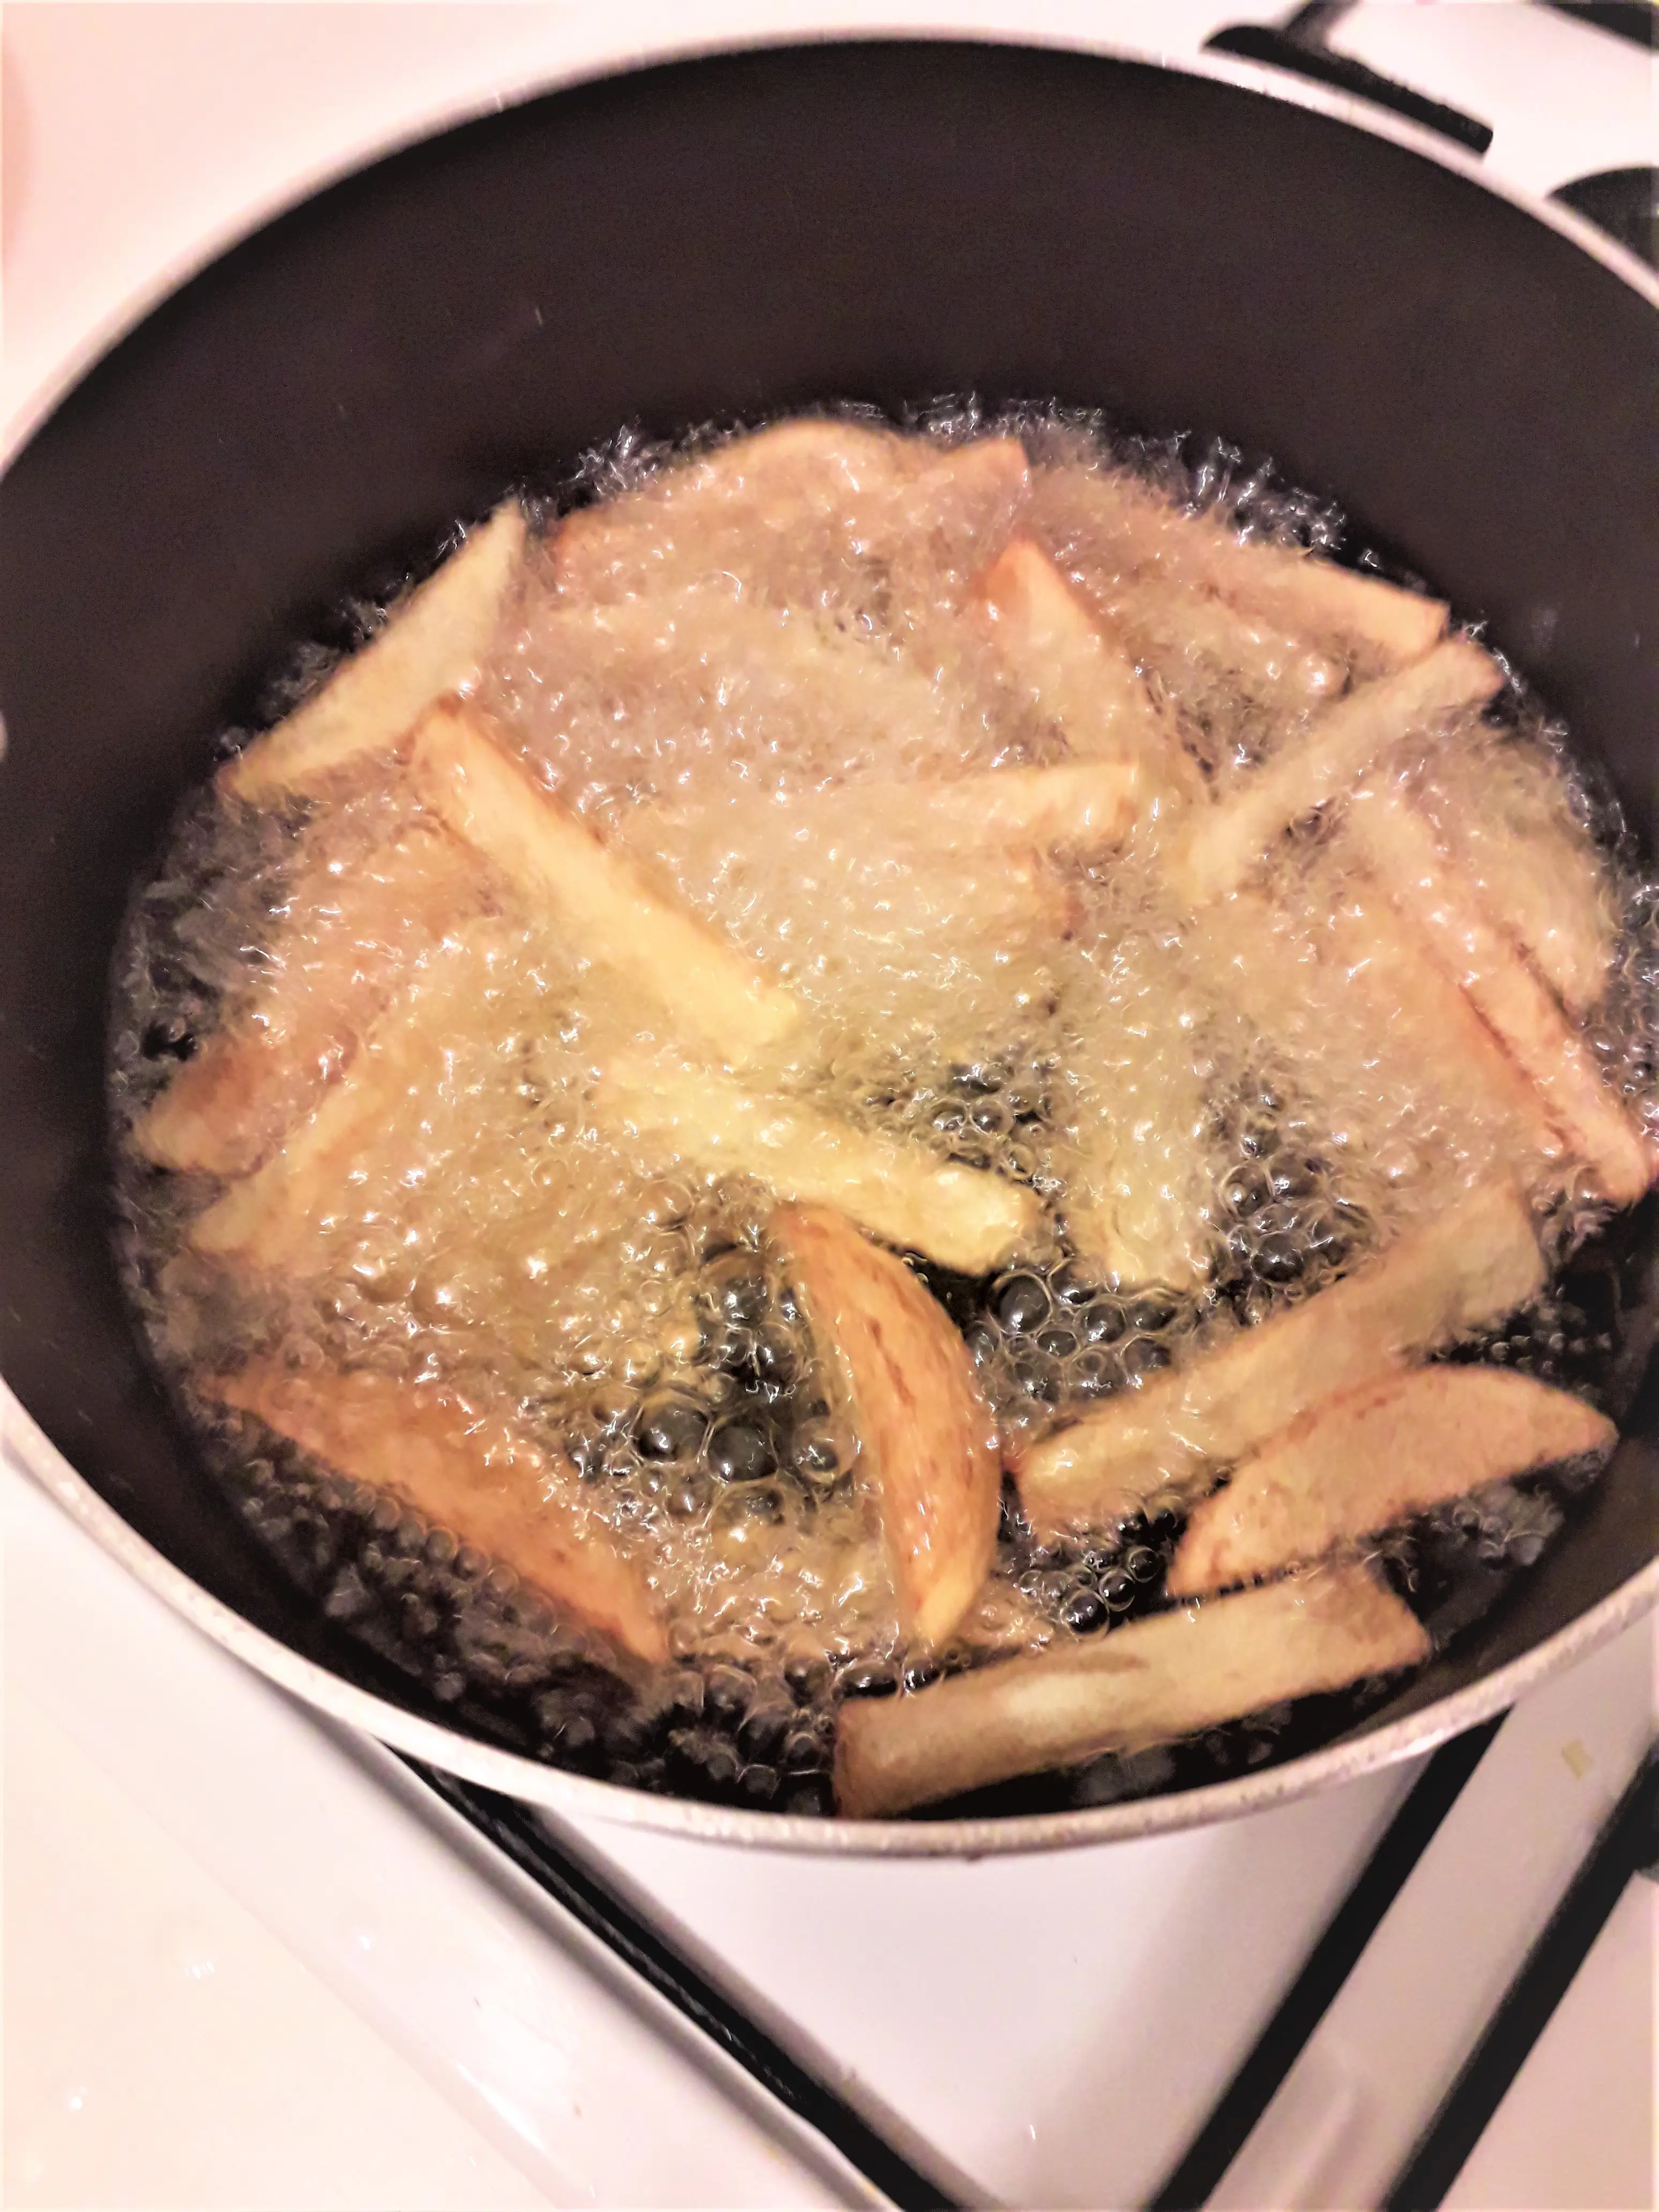 French Fries-Frying Potatoes at High Temperature